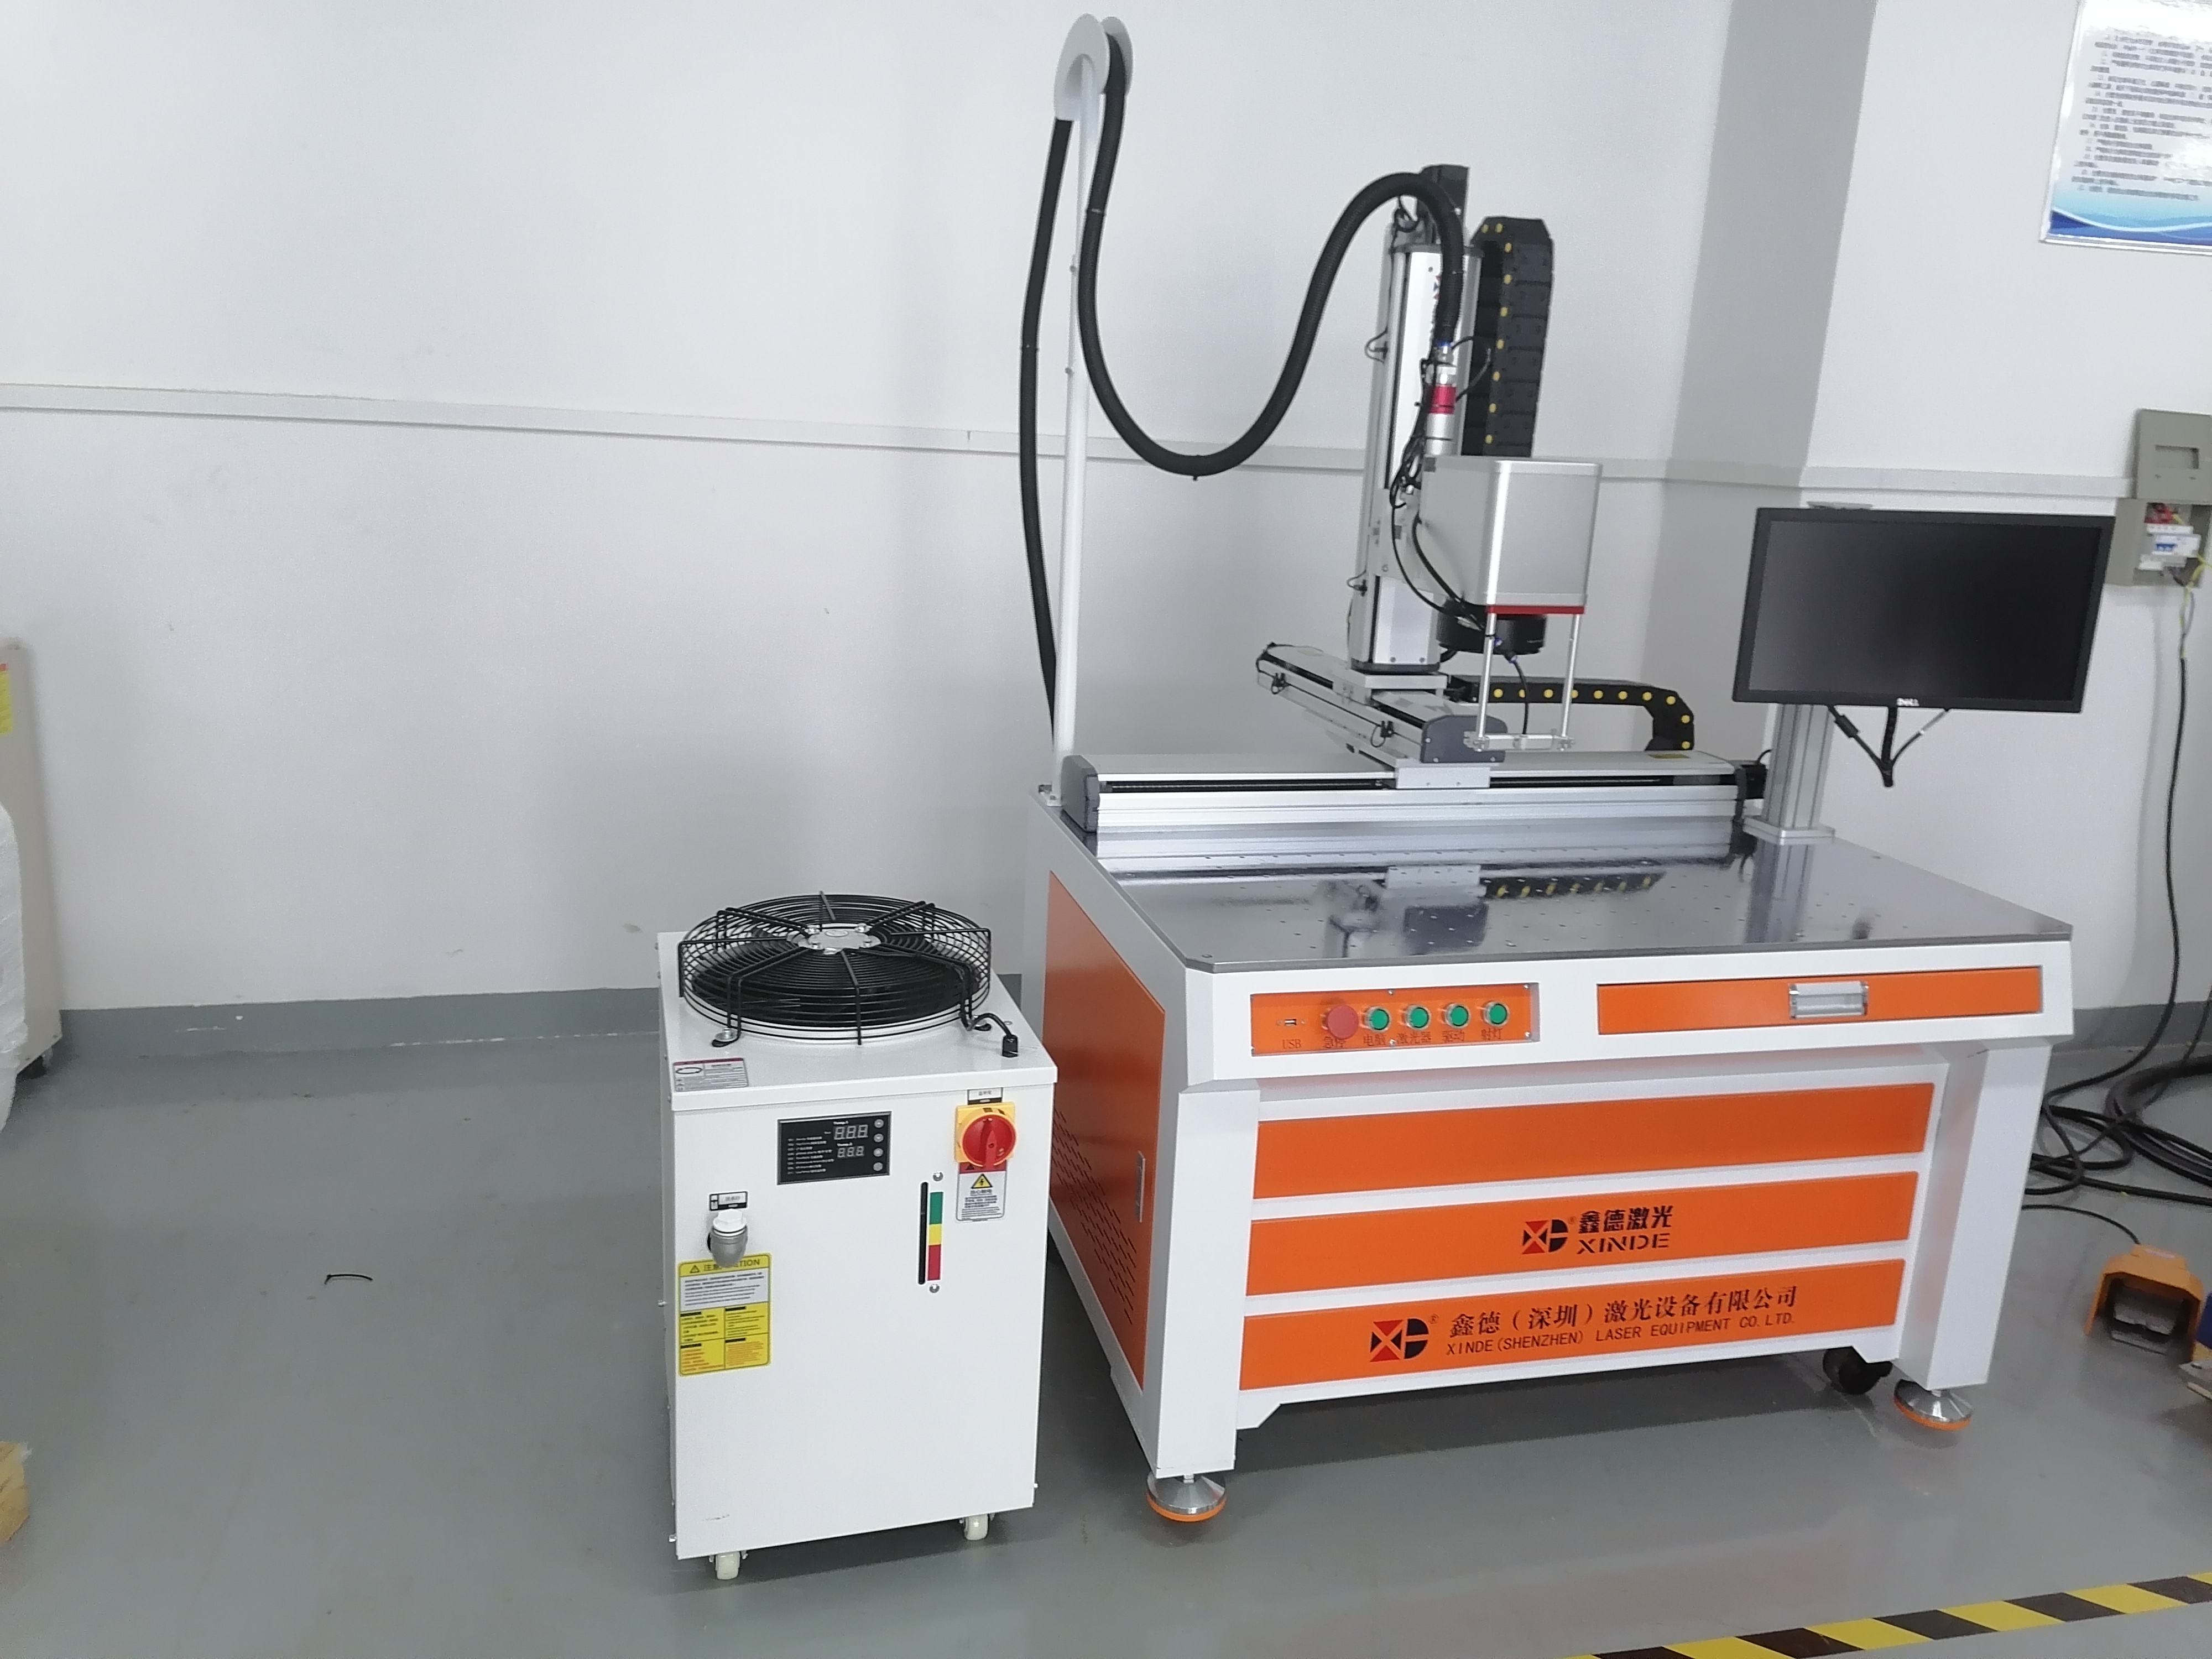 Battery pack laser welding technology analysis, choose the right laser welding machine